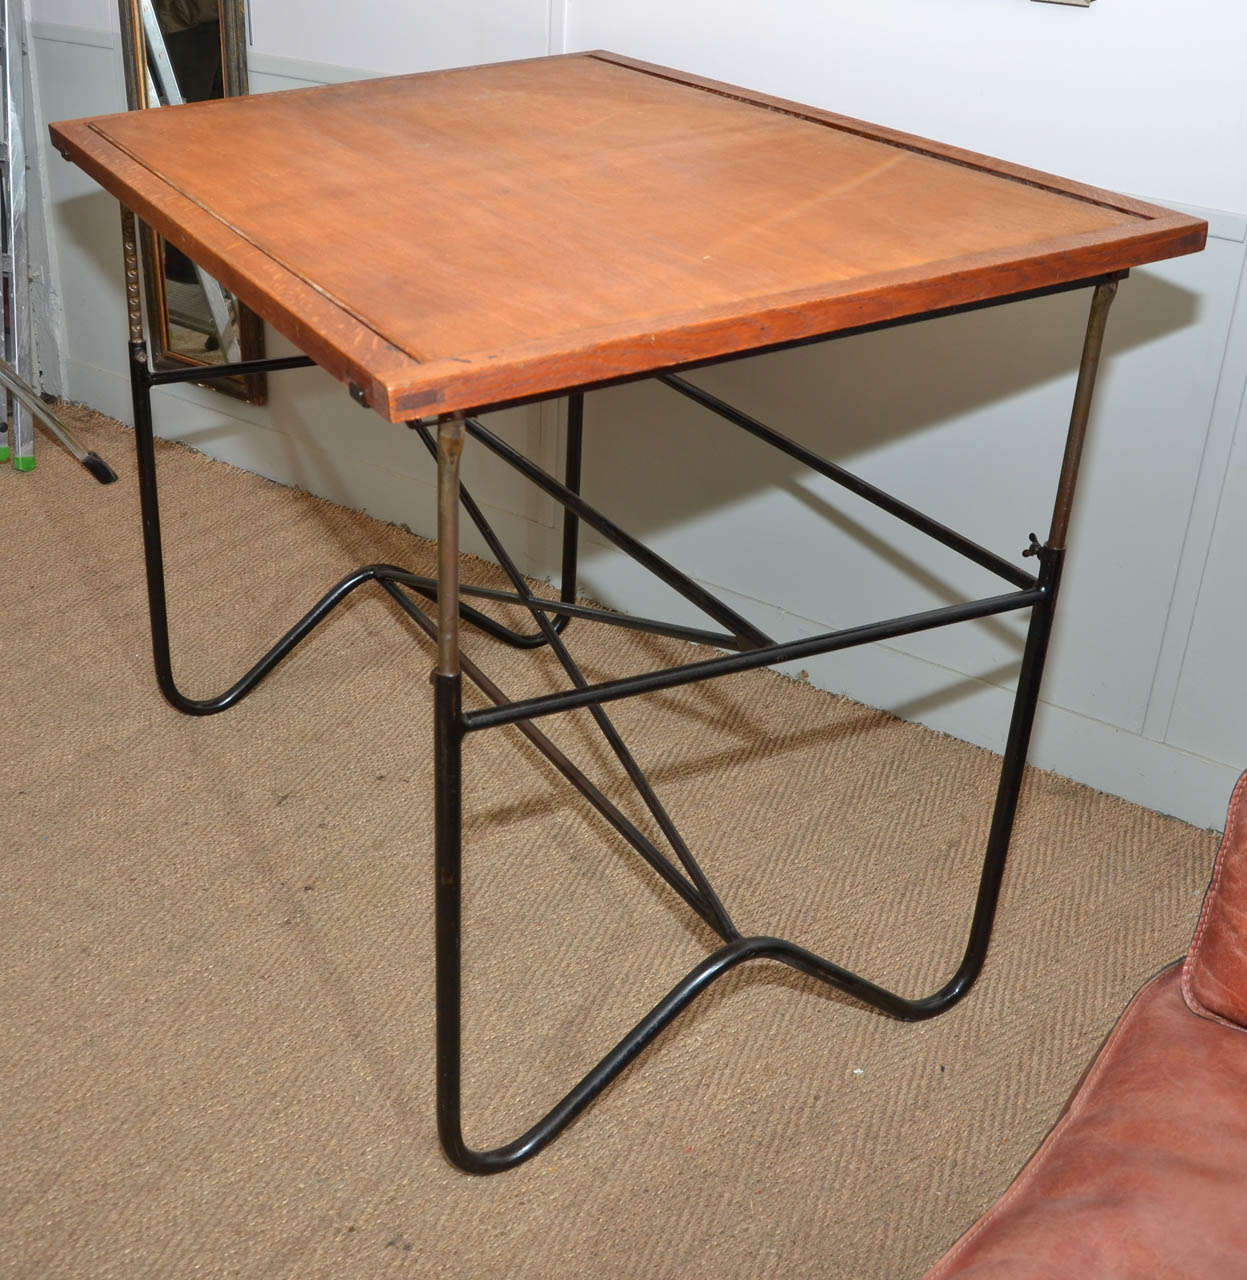 1950's architect table. Black lacquered and patina tube steel structure. Original top with oak frame and beech tree center. Adjustable (up to 51